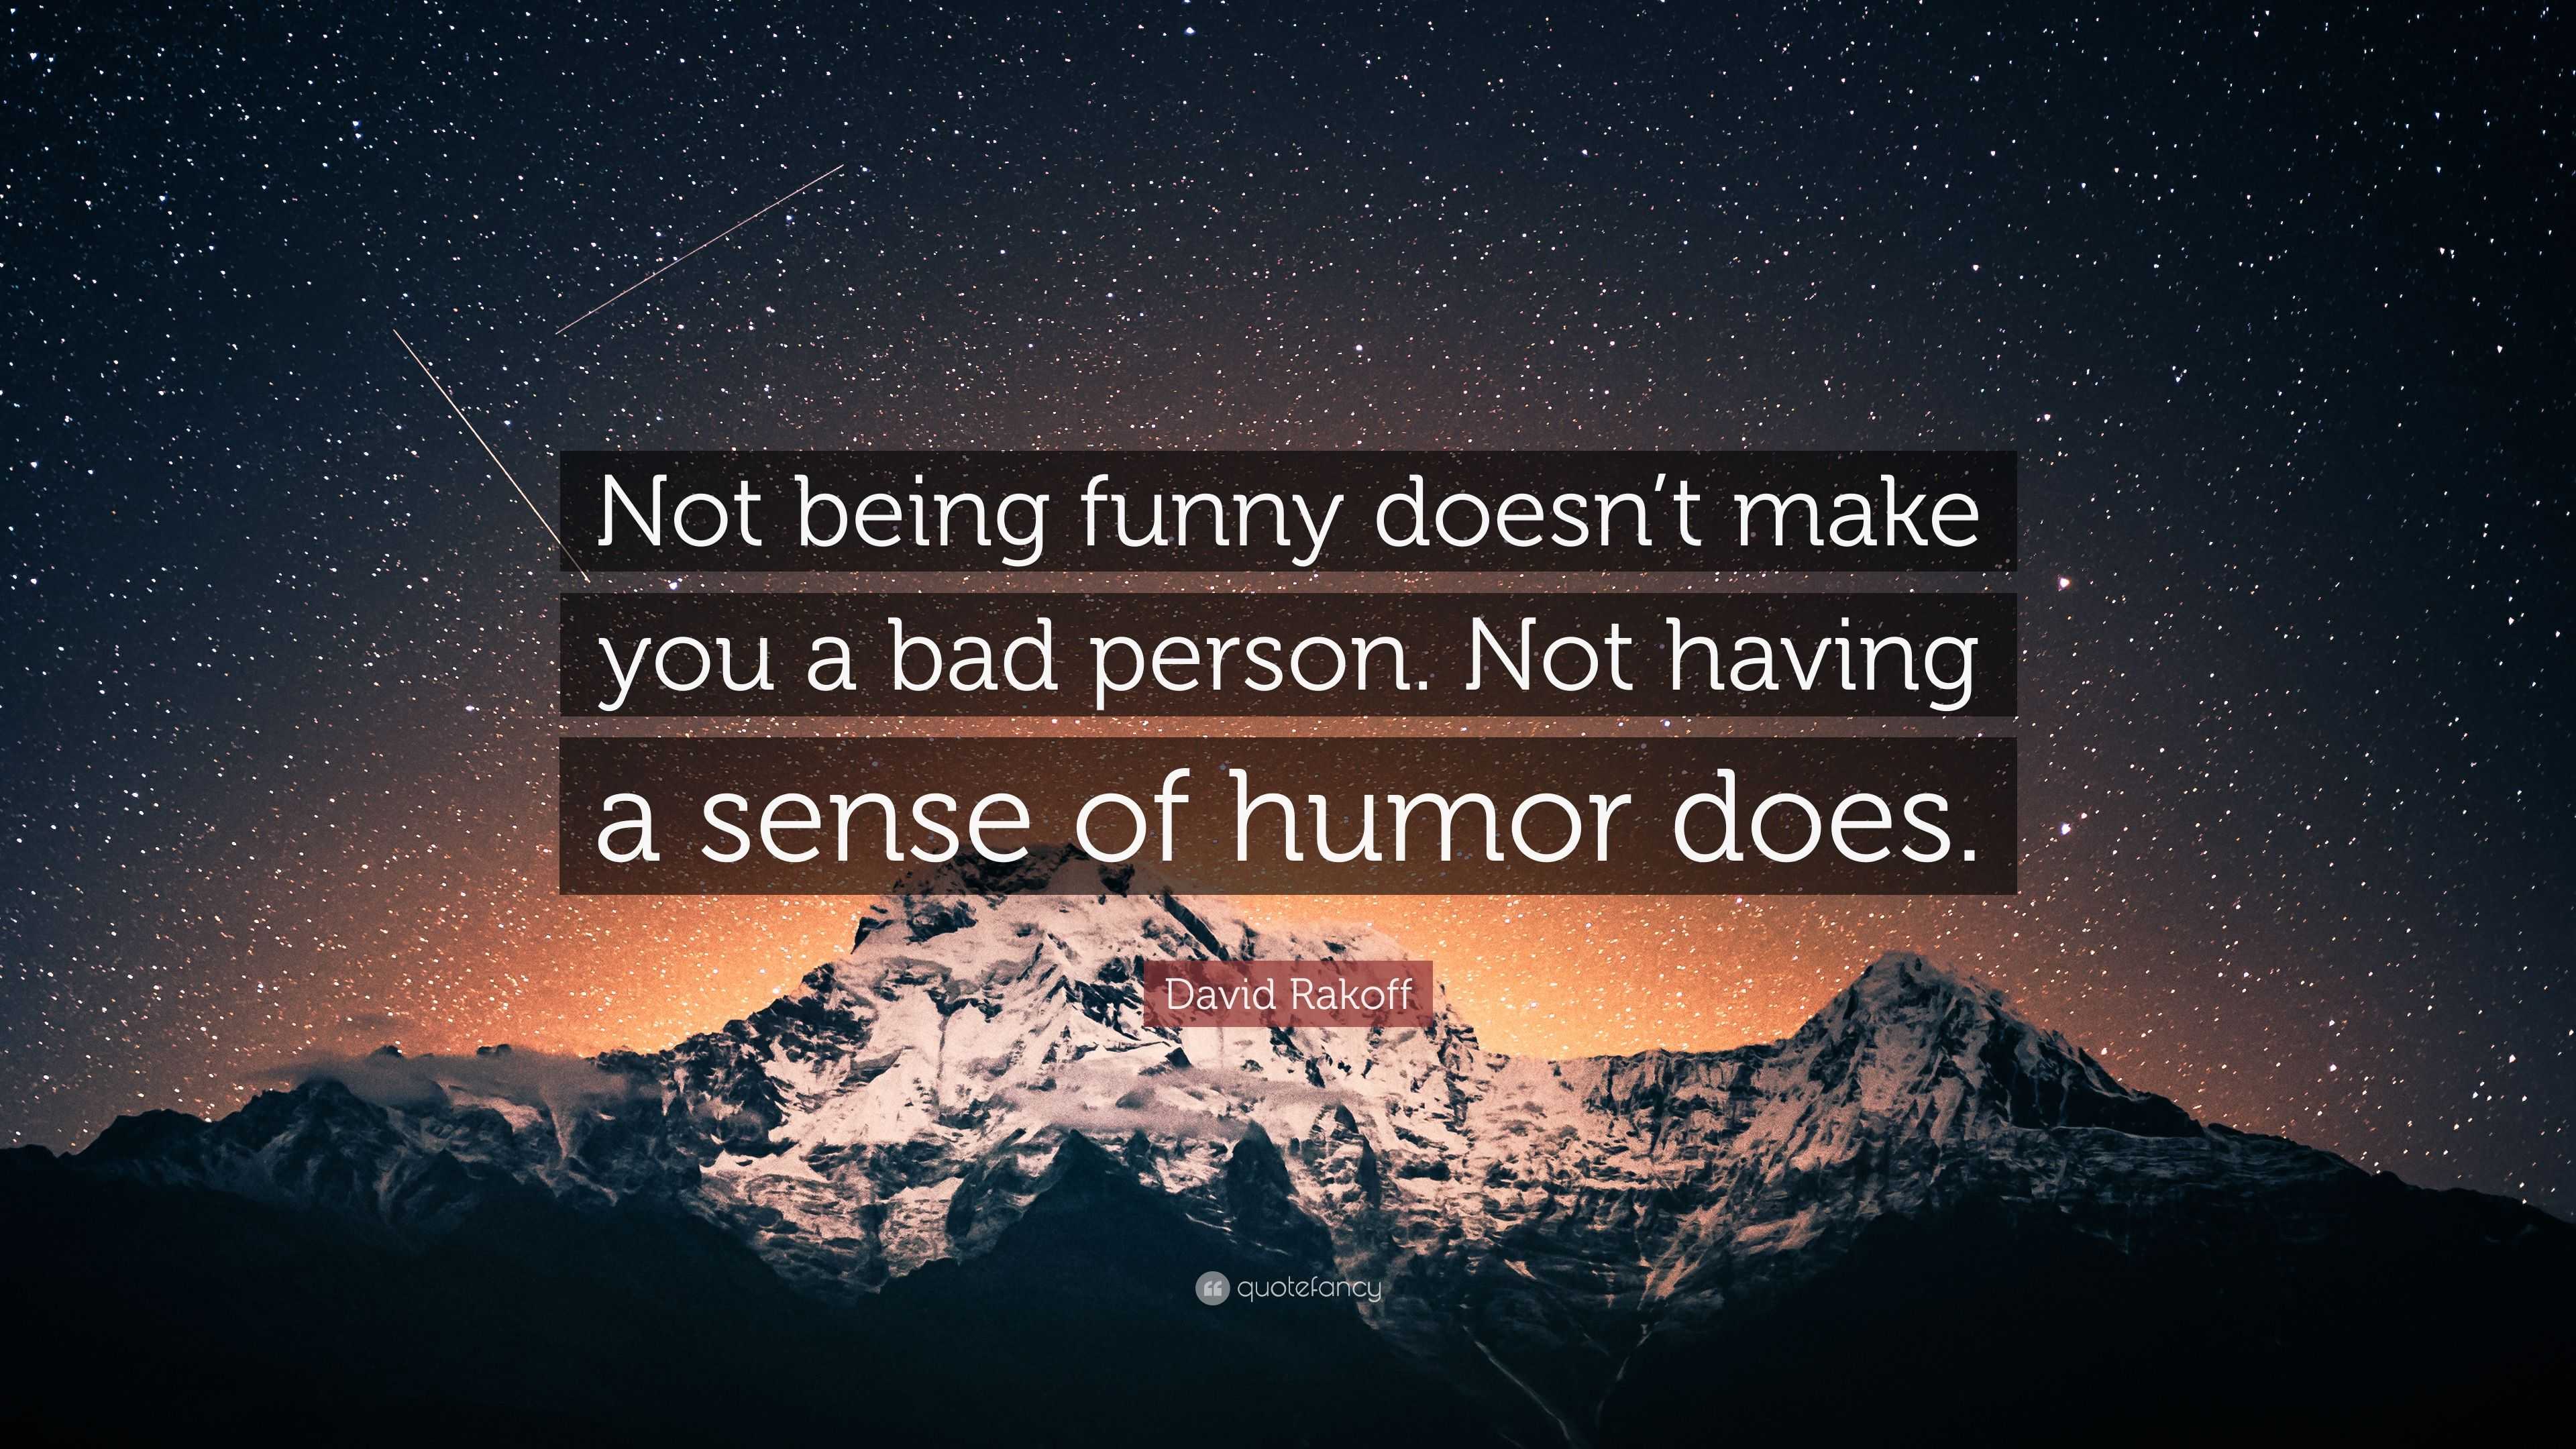 David Rakoff Quote: “Not being funny doesn't make you a bad person. Not  having a